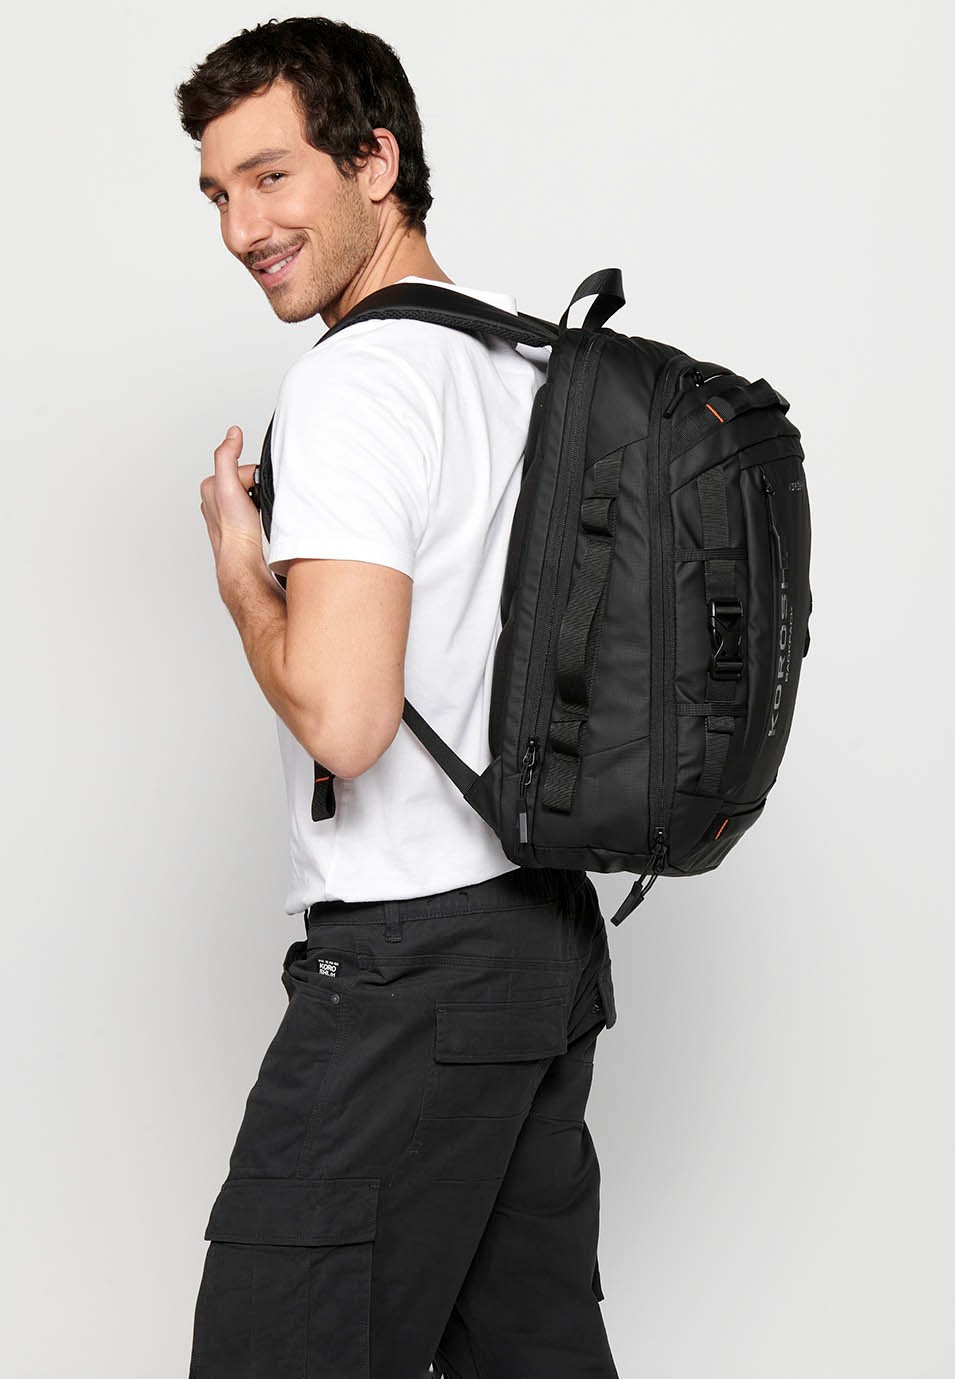 Koröshi backpack with two zippered compartments, one for a laptop and adjustable straps in Black 6